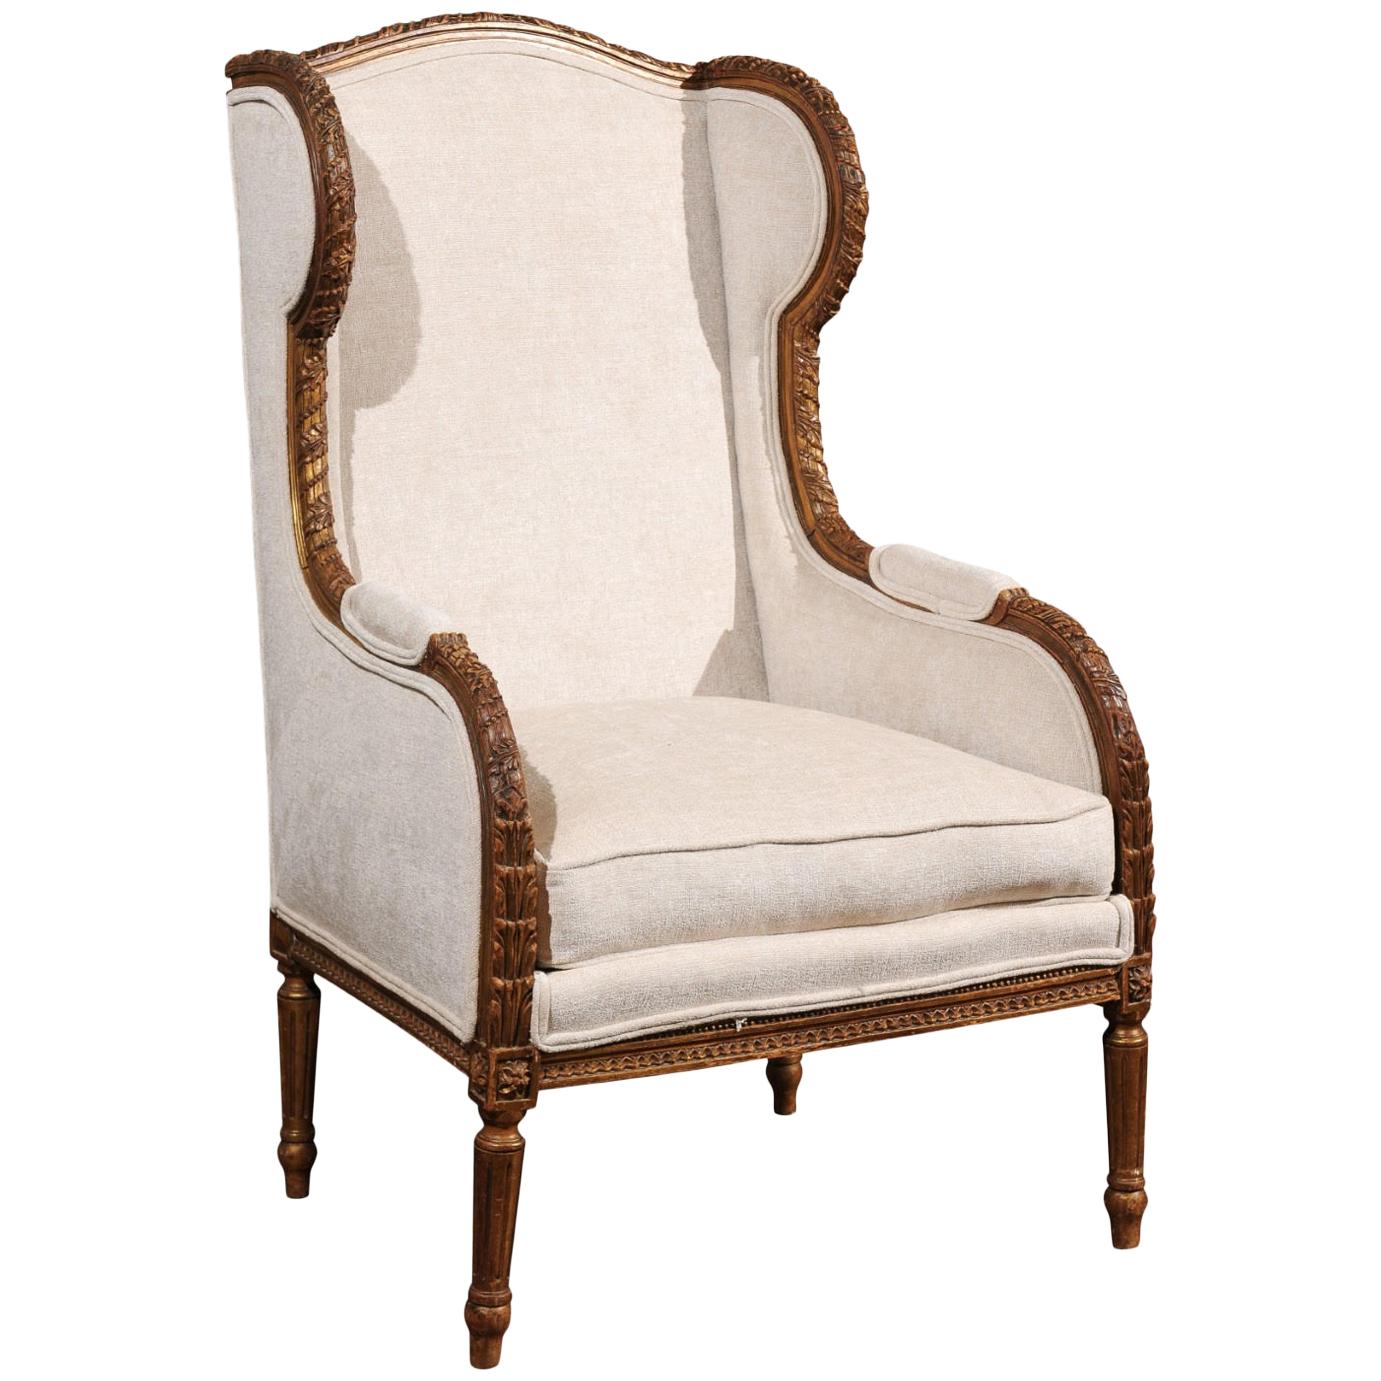 French Louis XVI Style Richly Hand Carved Wingback Chair with New Upholstery